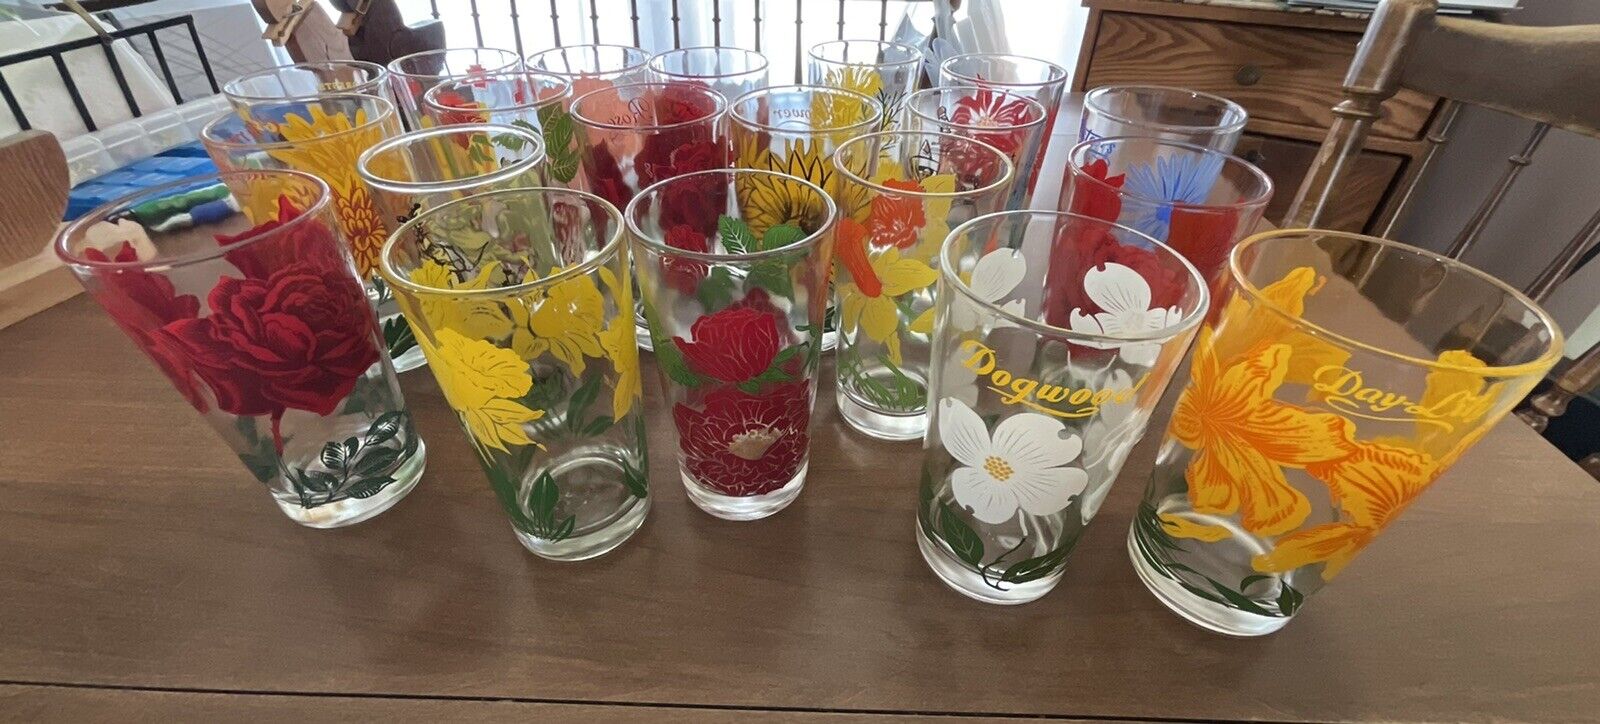 20 VTG- POSSIBLY 50’S- P-NUT/JELLY asst. GLASSES-BEAUTIFUL -all FLOWERS EXCEPT 4